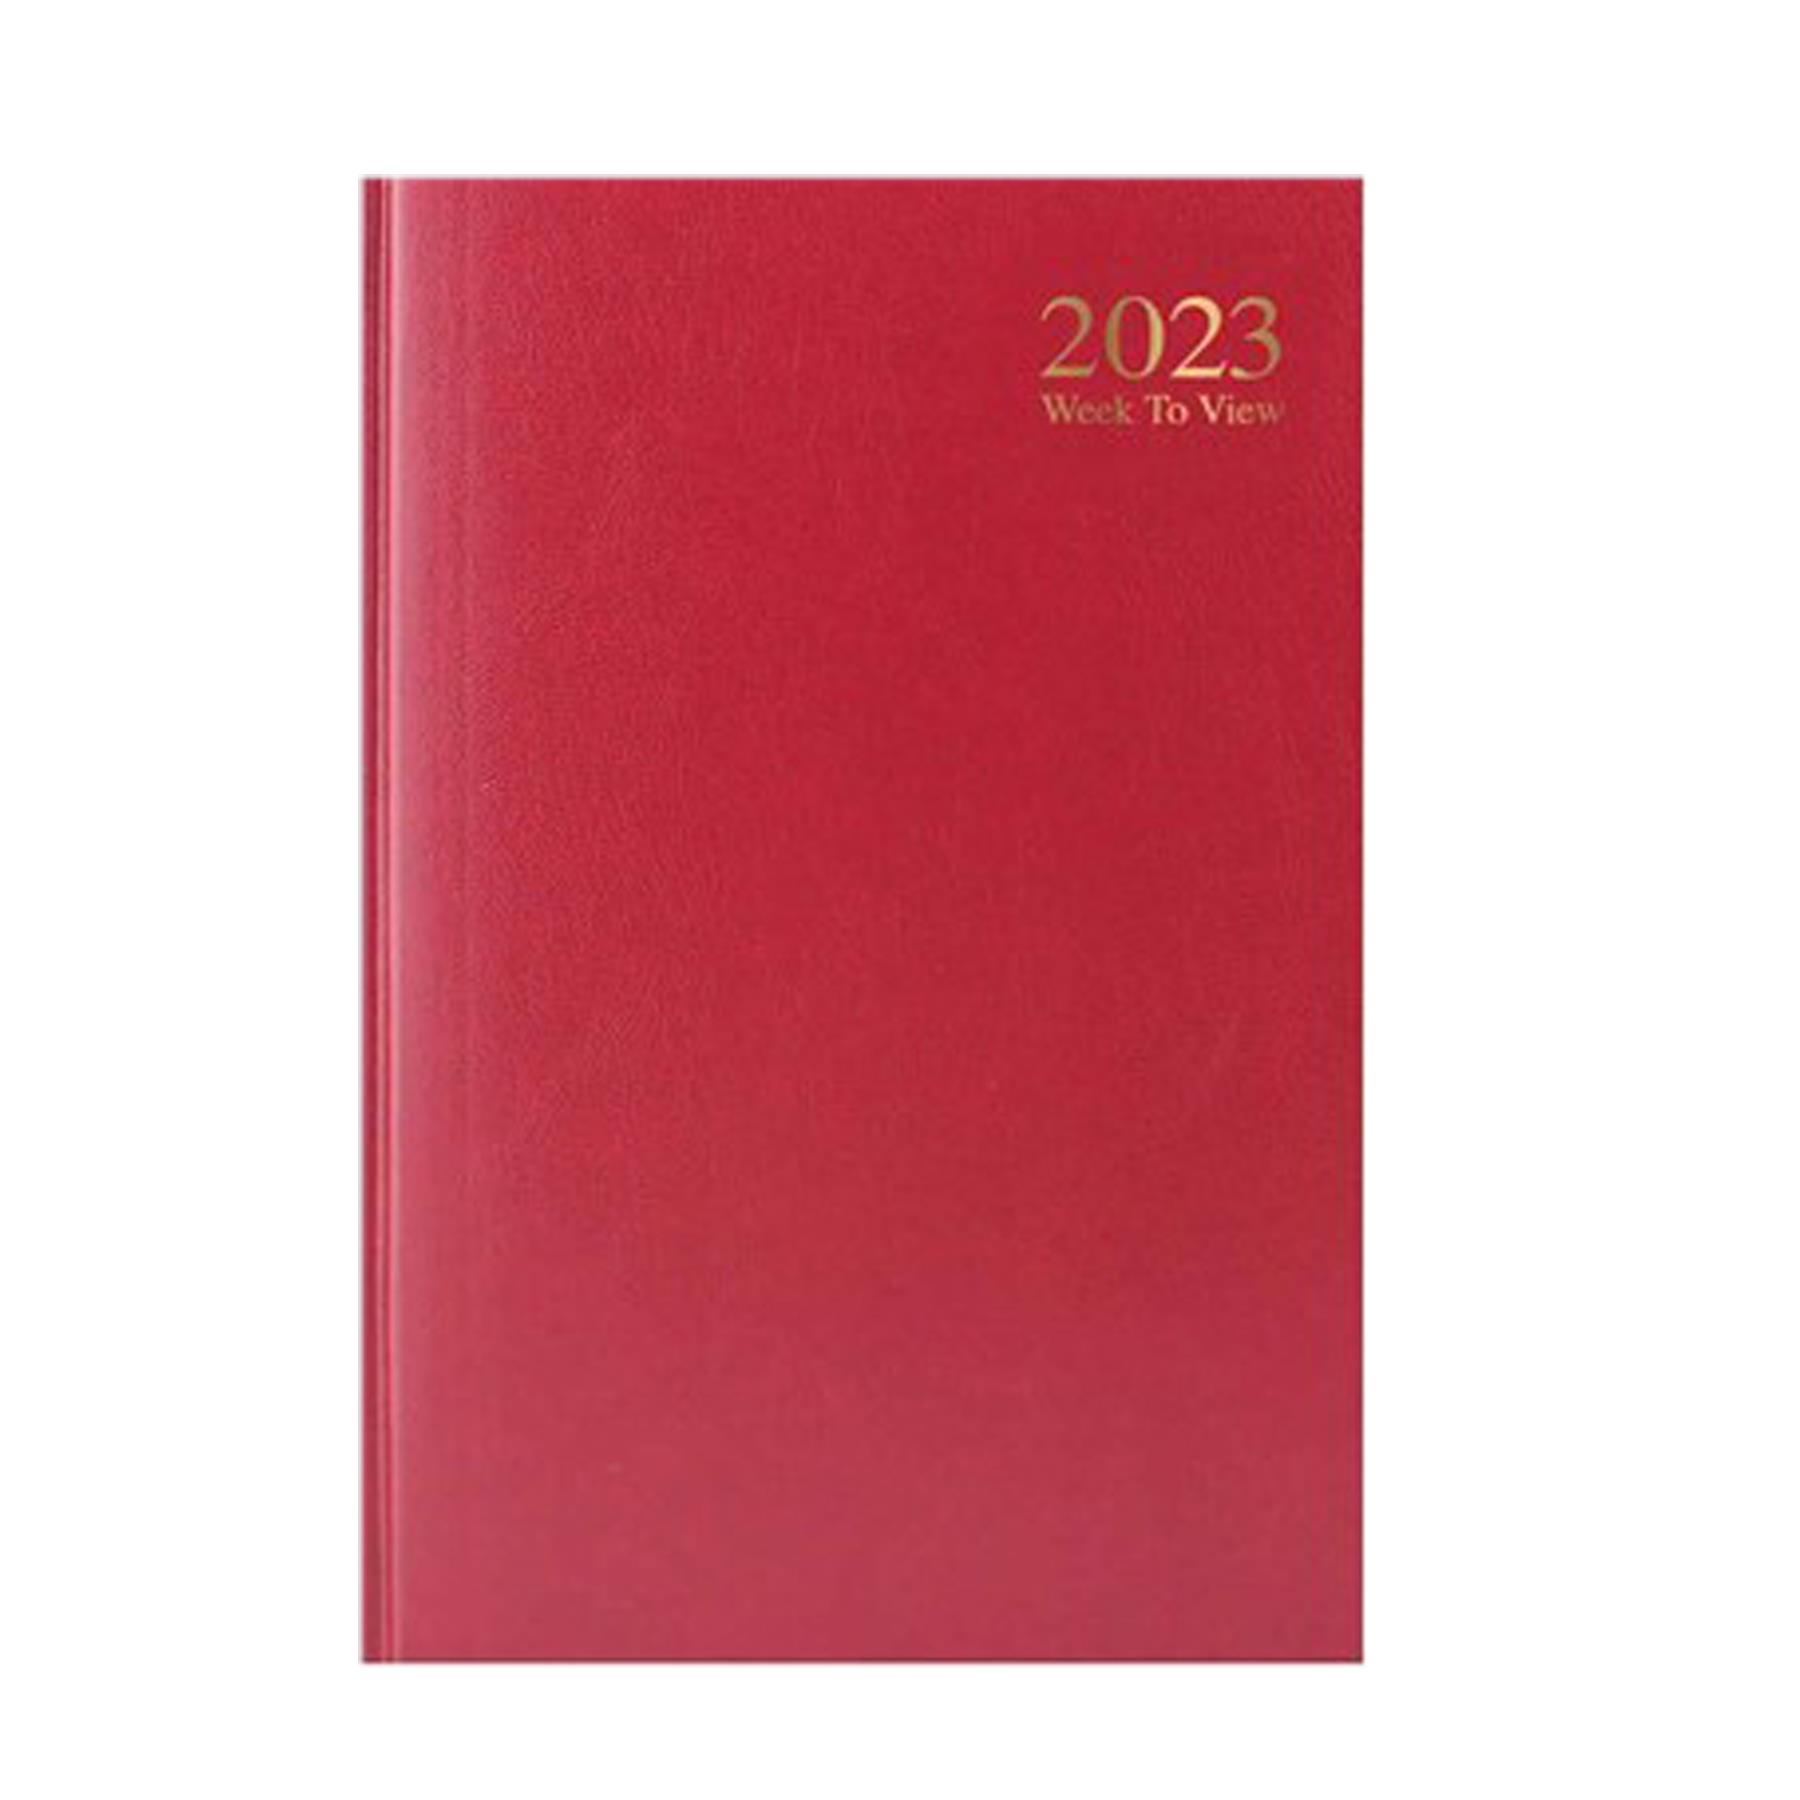 2023 A5 Hardback Week to View Diary 3183 - Red